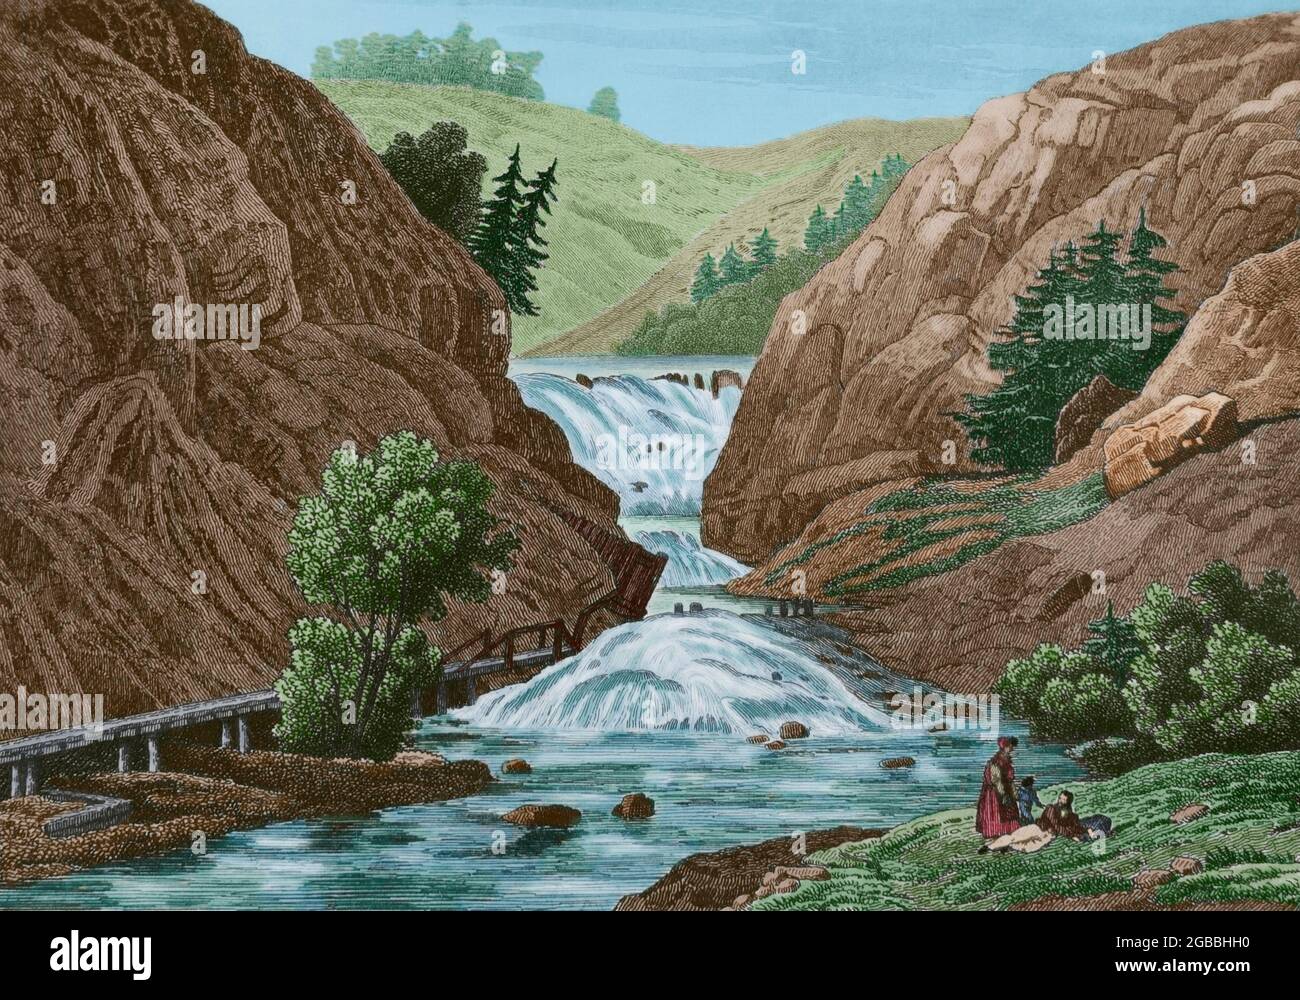 United States of America. Waterfalls at Mount Ida. Engraving by Milbert. Panorama Universal. History of the United States of America, from 1st edition of Jean B.G. Roux de Rochelle's Etats-Unis d'Amérique in 1837. Spanish edition, printed in Barcelona, 1850. Later colouration. Author: Jacques Gerard Milbert (1766-1840). French engraver. Stock Photo